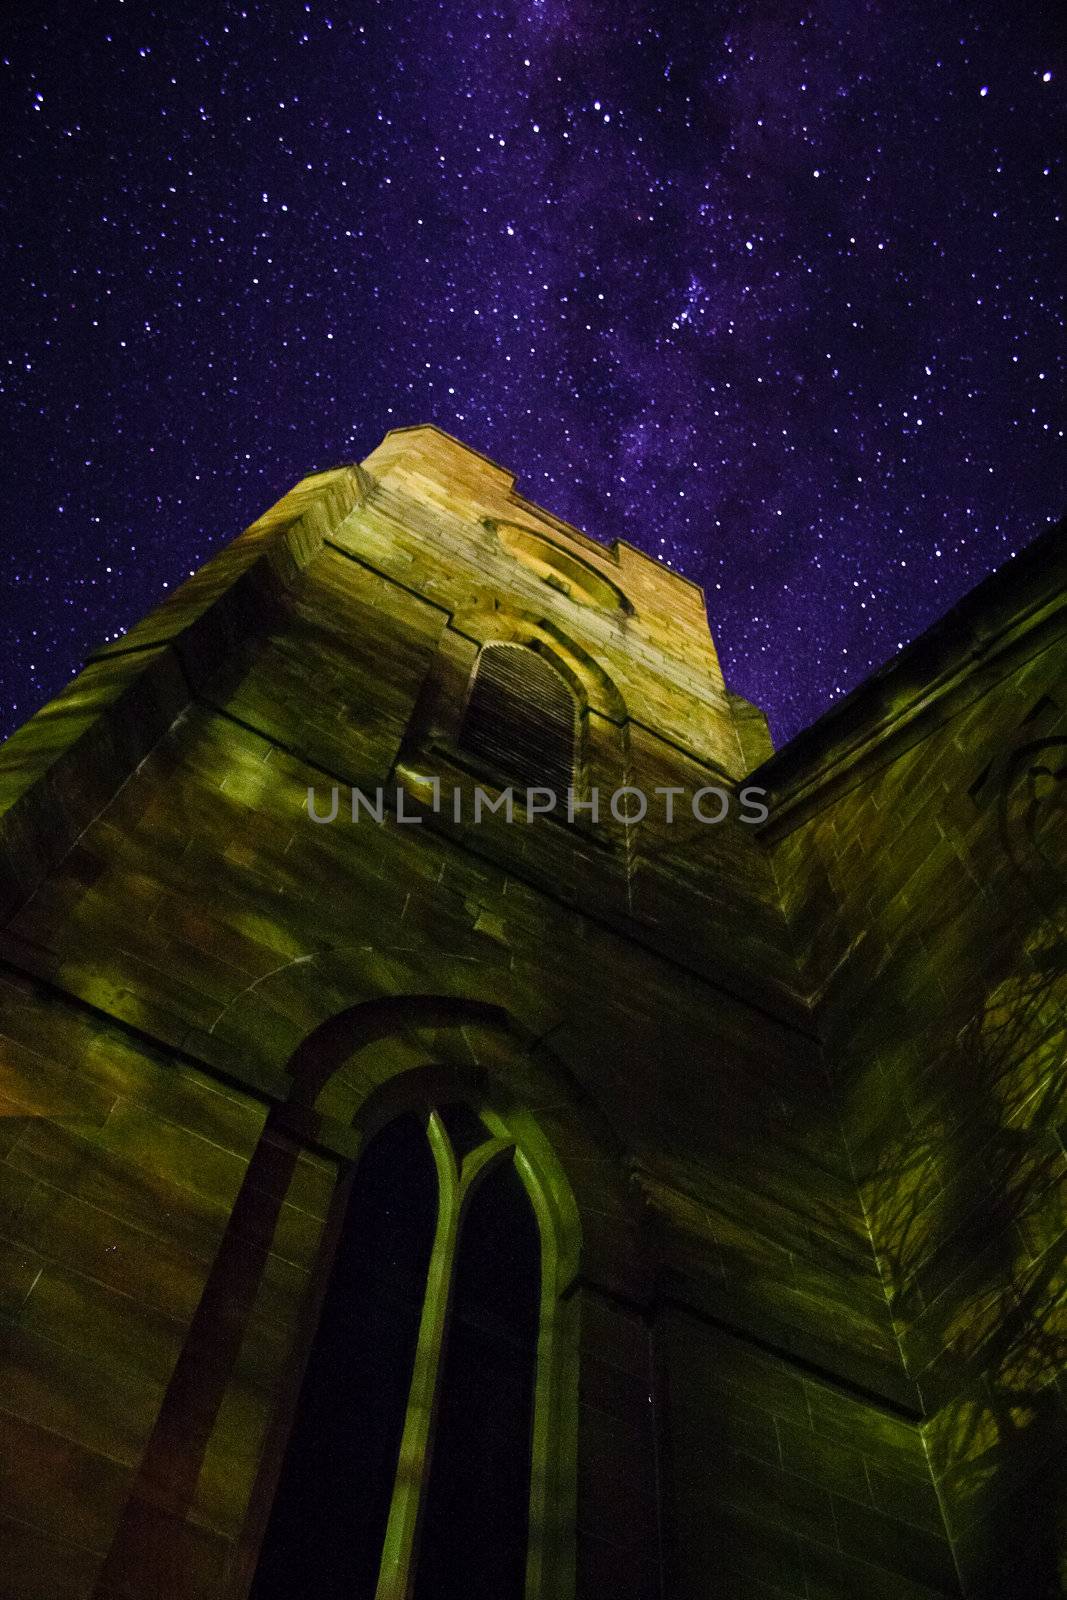 Church tower against a starry sky by jrstock